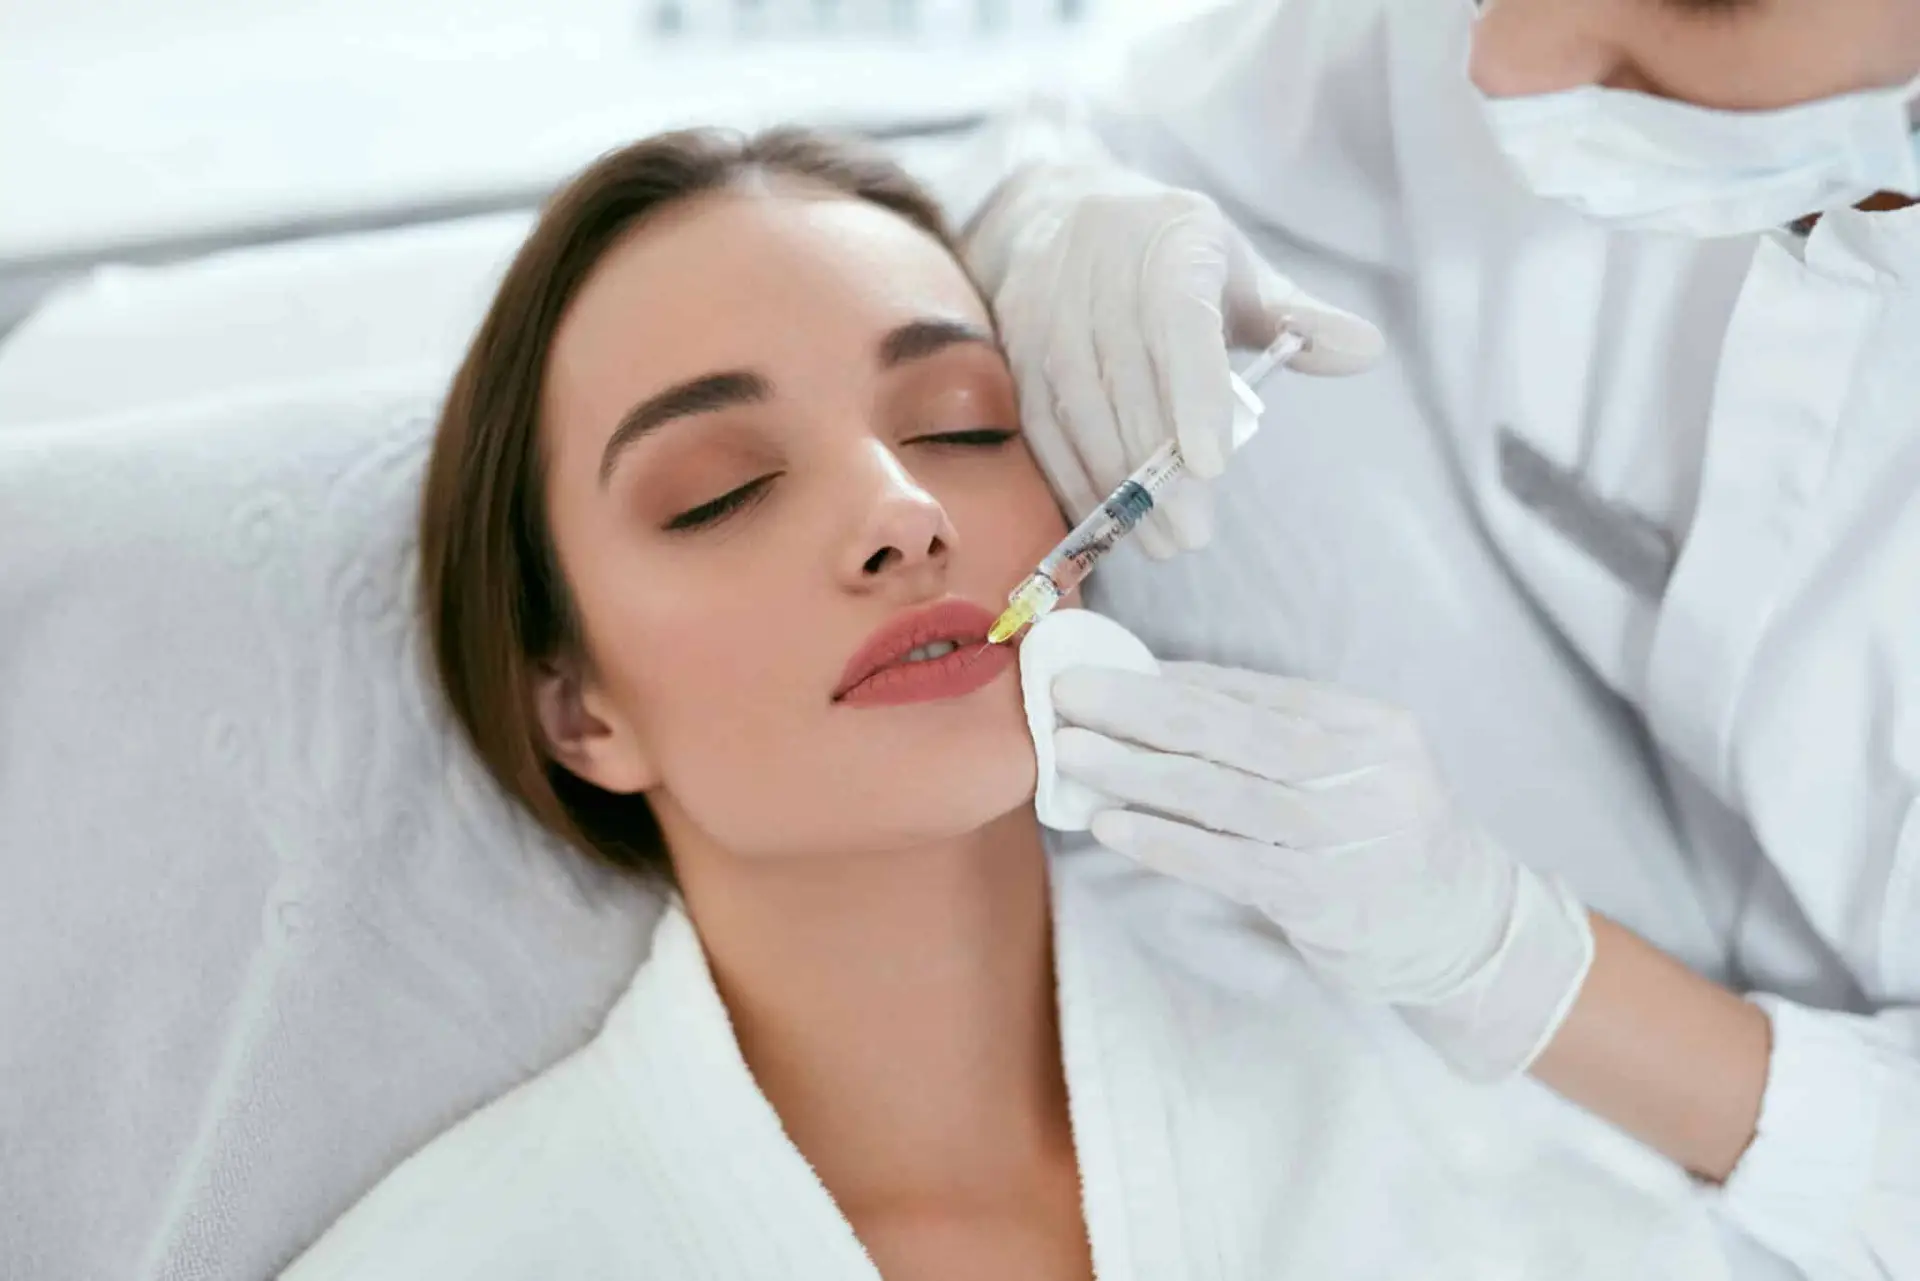 fillers & injections from our healthcare professional.